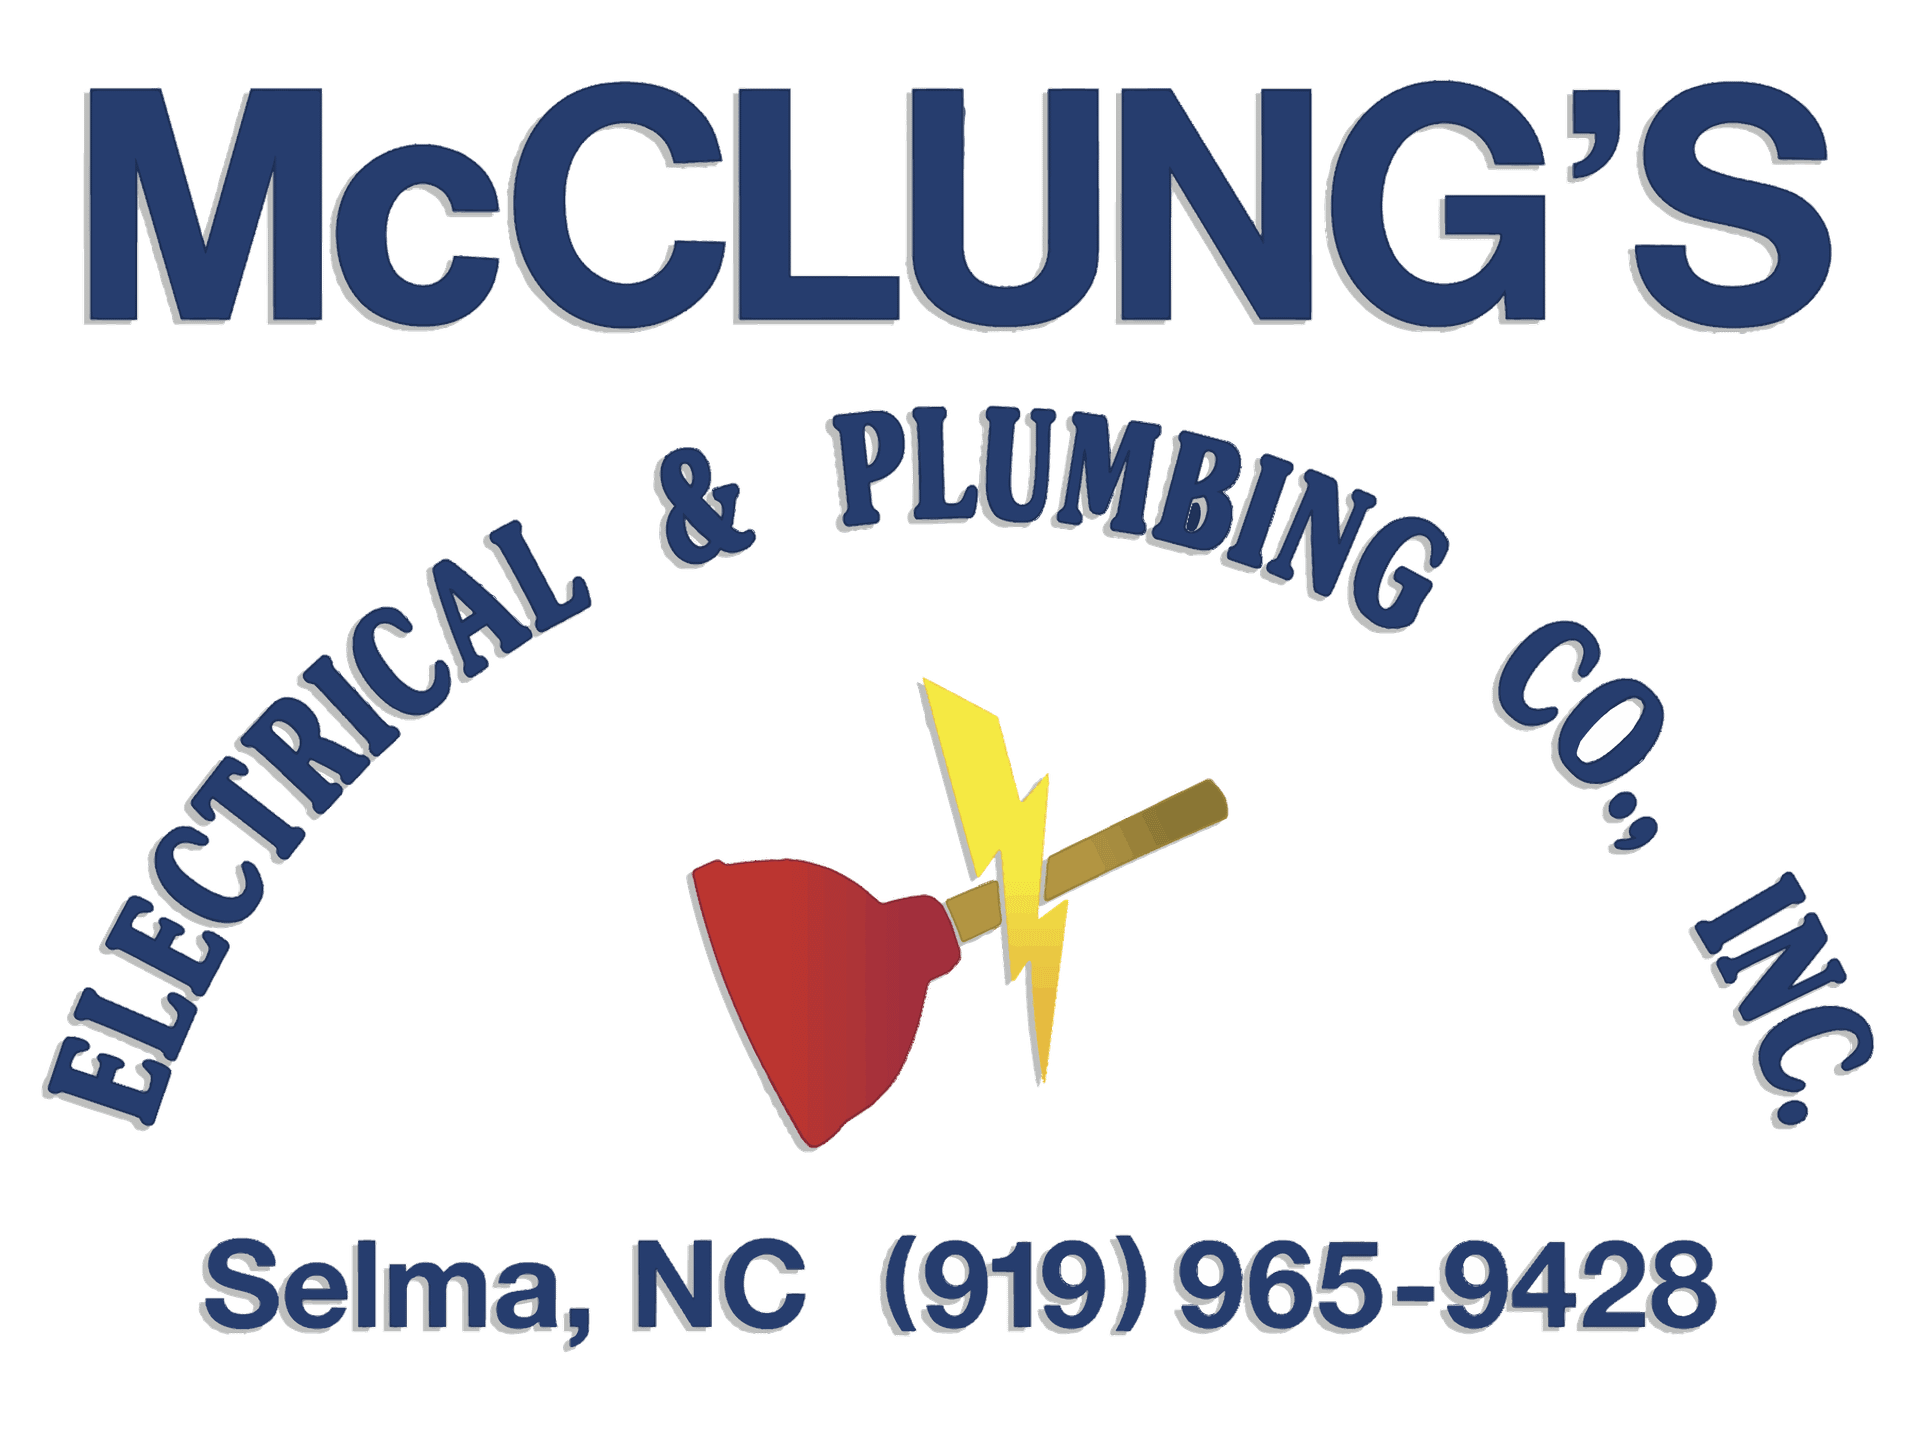 McClung's Electrical